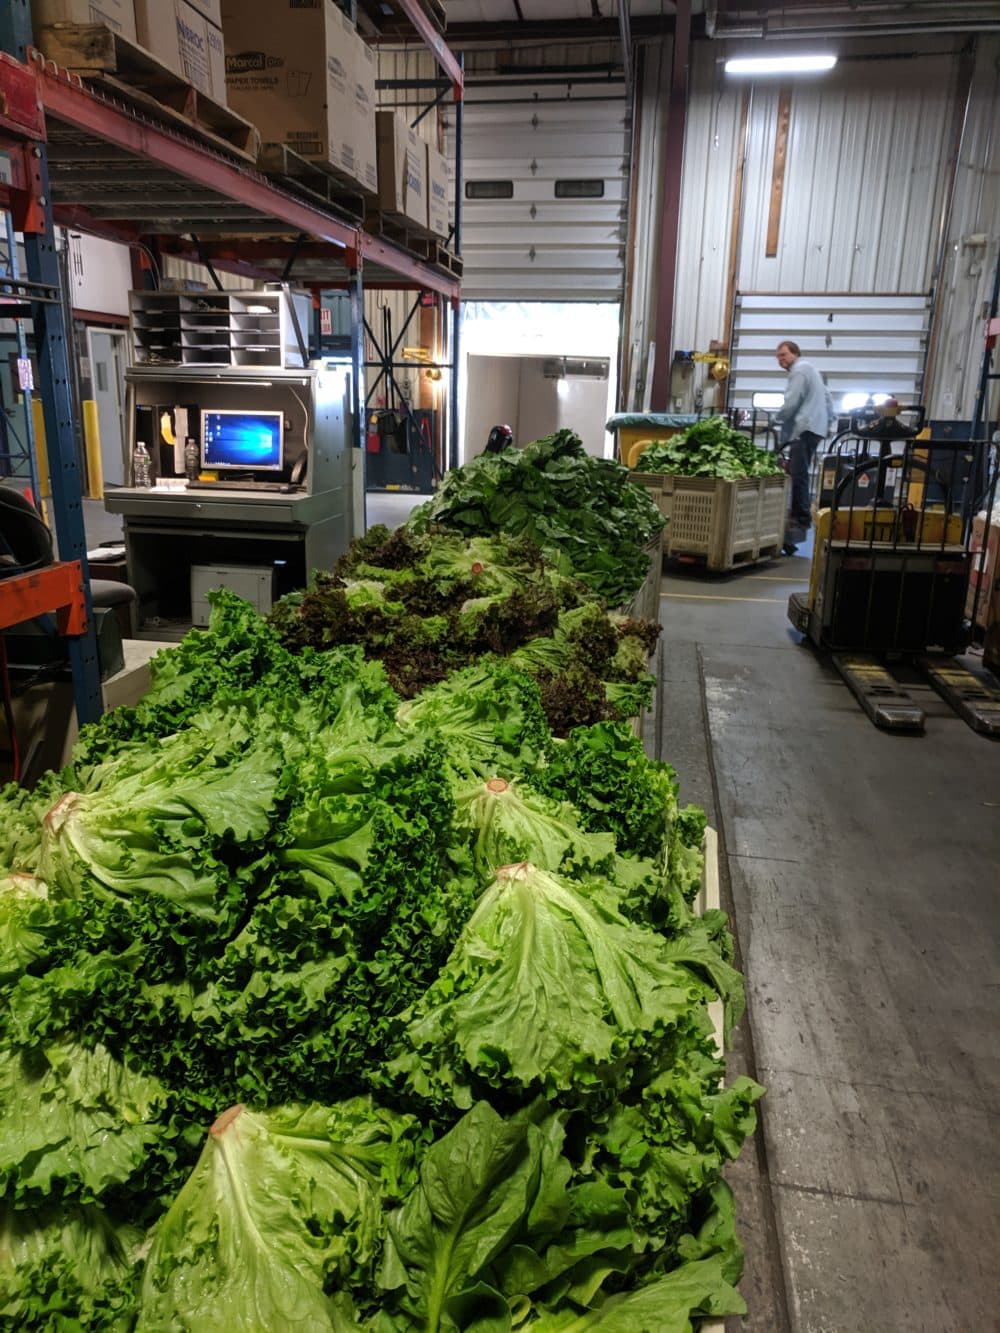 The Food Bank of Western Massachusetts distributes on average a total of one million pounds of food each month. Annually, 12 million pounds is distributed, 30% of which is fresh produce. (Courtesy the Food Bank of Western Massachusetts)